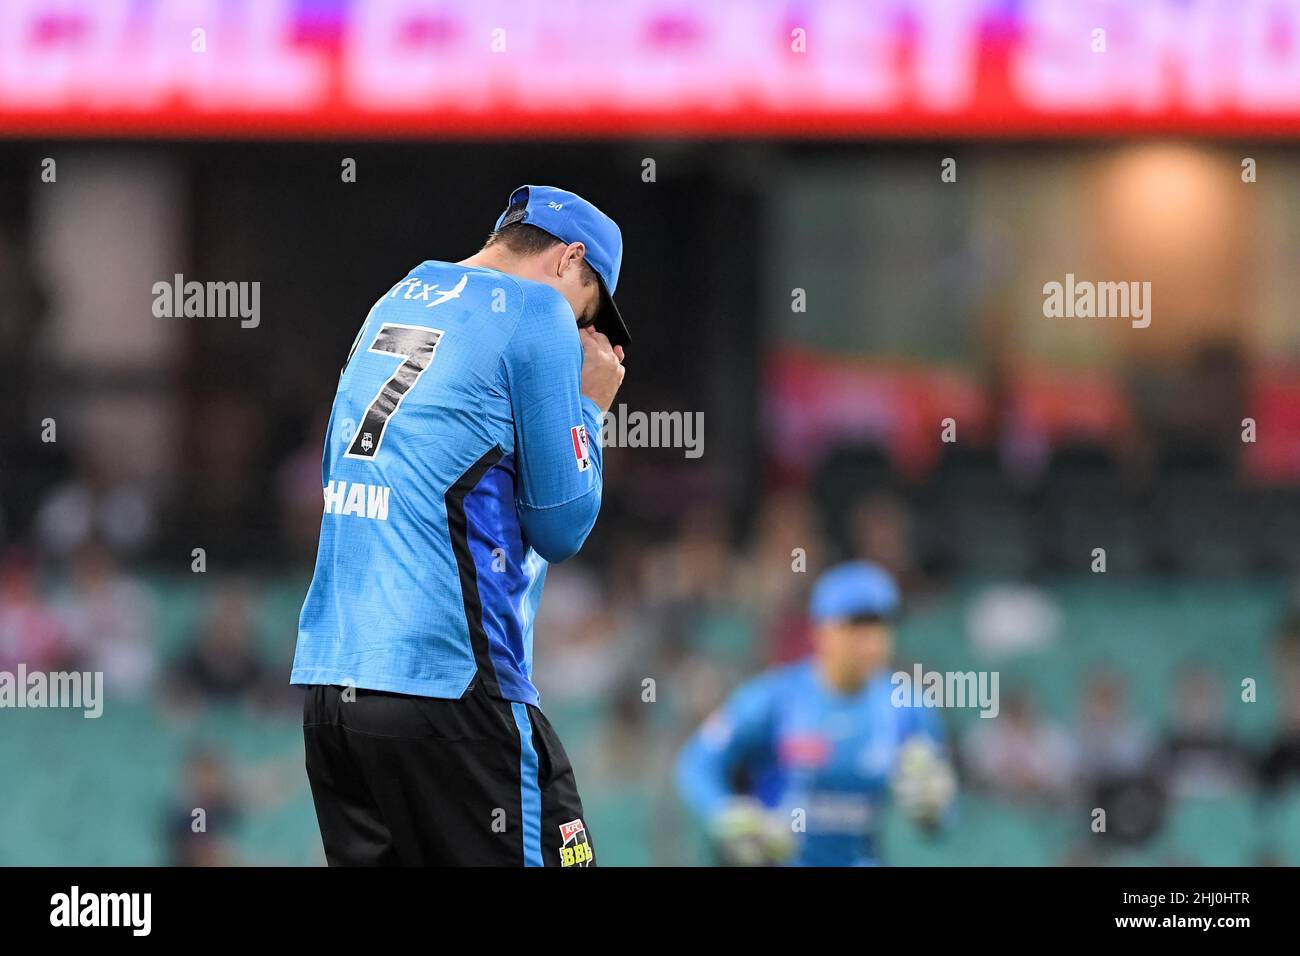 Sydney, Australia, 26 January, 2022. Matt Renshaw of the Strikers catches out Dan Christian of the Sixers during the Big Bash League Challenger cricket match between Sydney Sixers and Adelaide Strikers at The Sydney Cricket Ground on January 26, 2022 in Sydney, Australia. Credit: Steven Markham/Speed Media/Alamy Live News Stock Photo